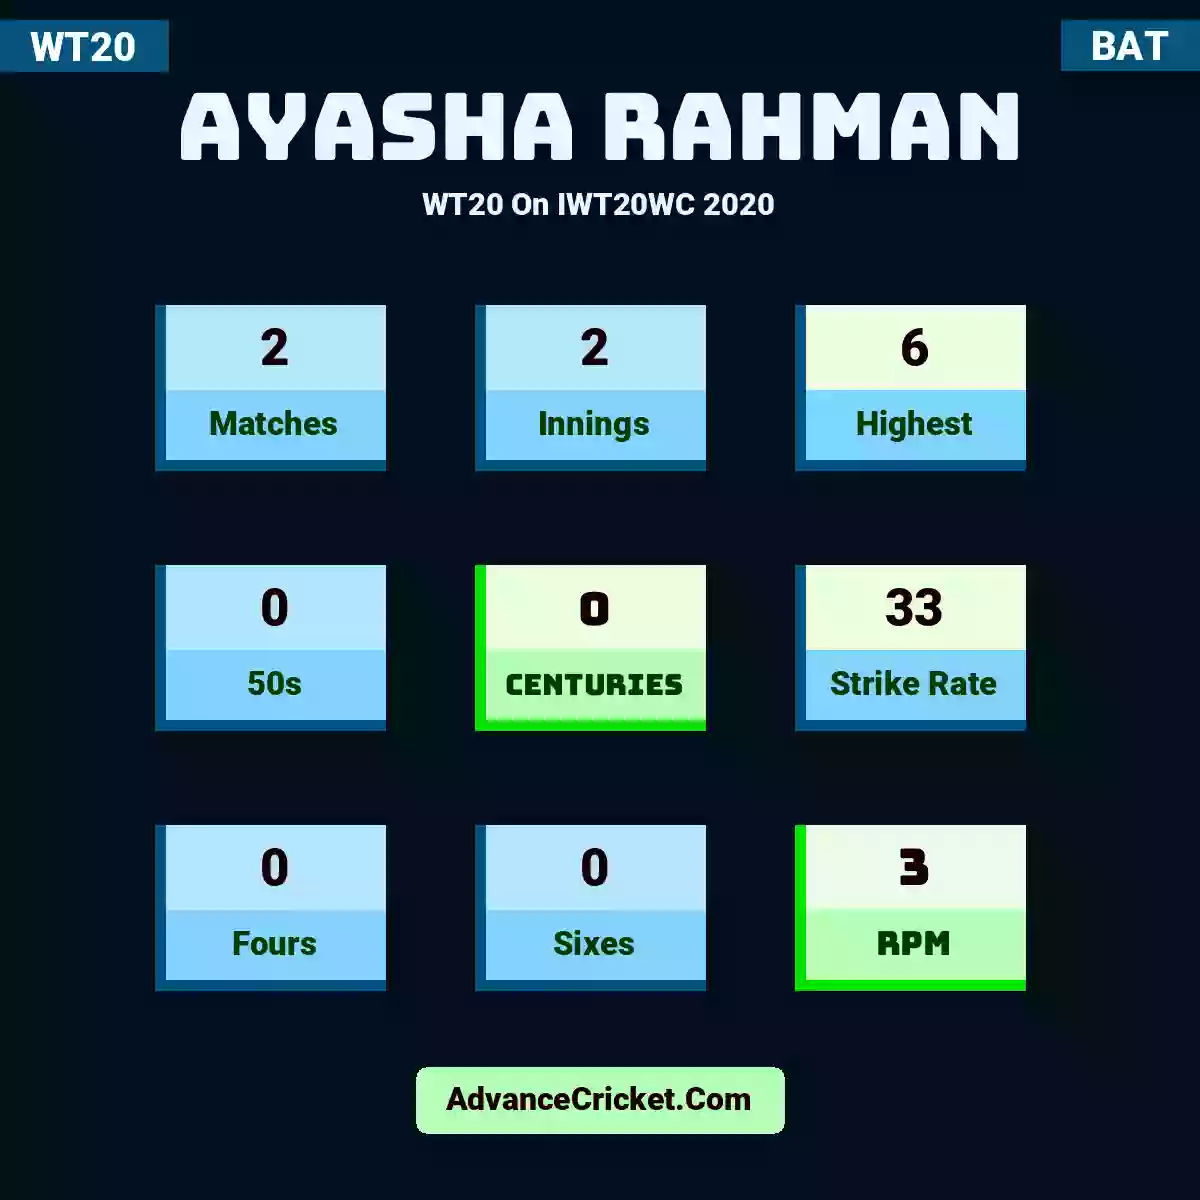 Ayasha Rahman WT20  On IWT20WC 2020, Ayasha Rahman played 2 matches, scored 6 runs as highest, 0 half-centuries, and 0 centuries, with a strike rate of 33. A.Rahman hit 0 fours and 0 sixes, with an RPM of 3.